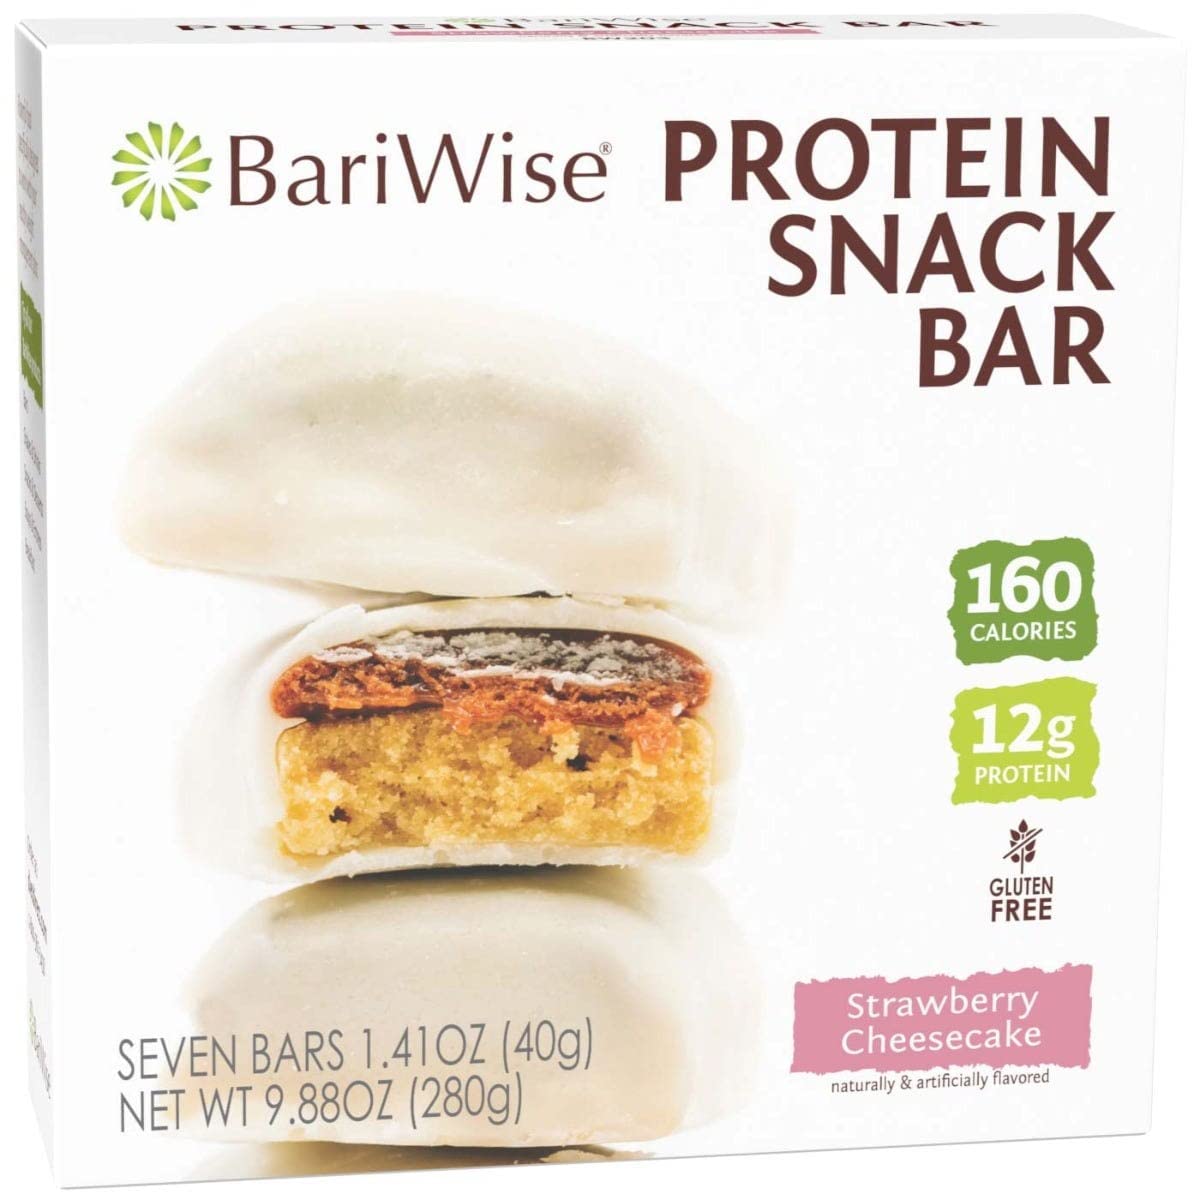 BariWise Strawberry Cheesecake Protein Snack Bar and Maple & Brown Sugar Protein Oatmeal Bundle